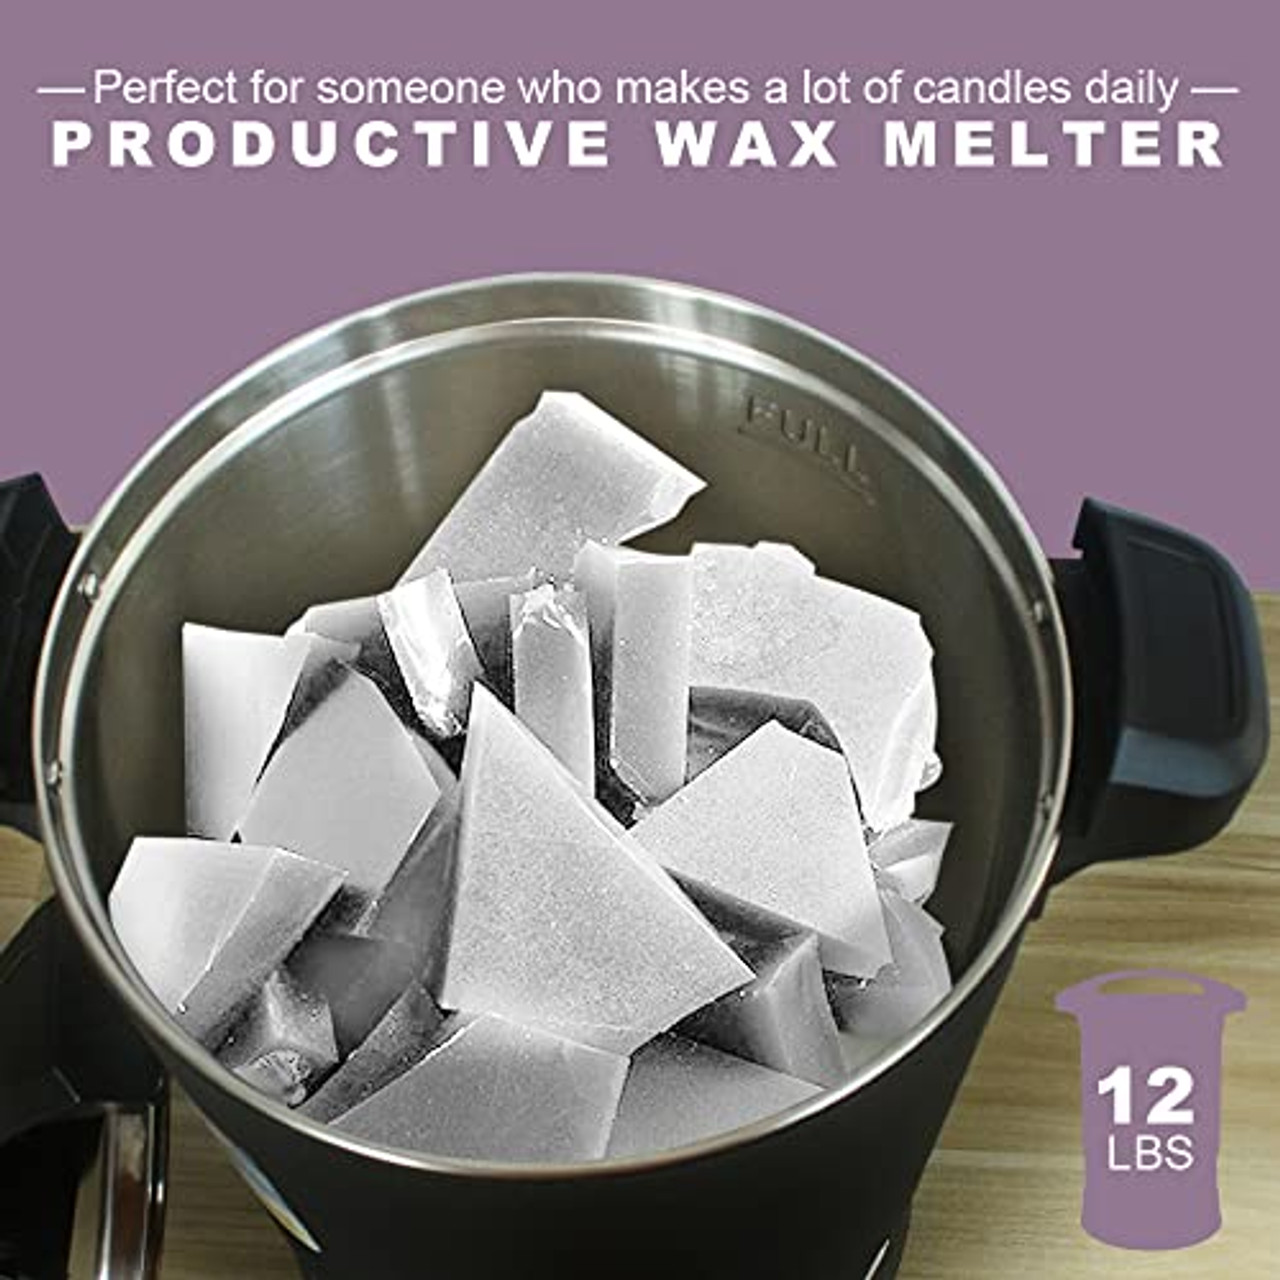 Wax Melter for Candle Making - 12 Lbs Extra Large Electric Wax